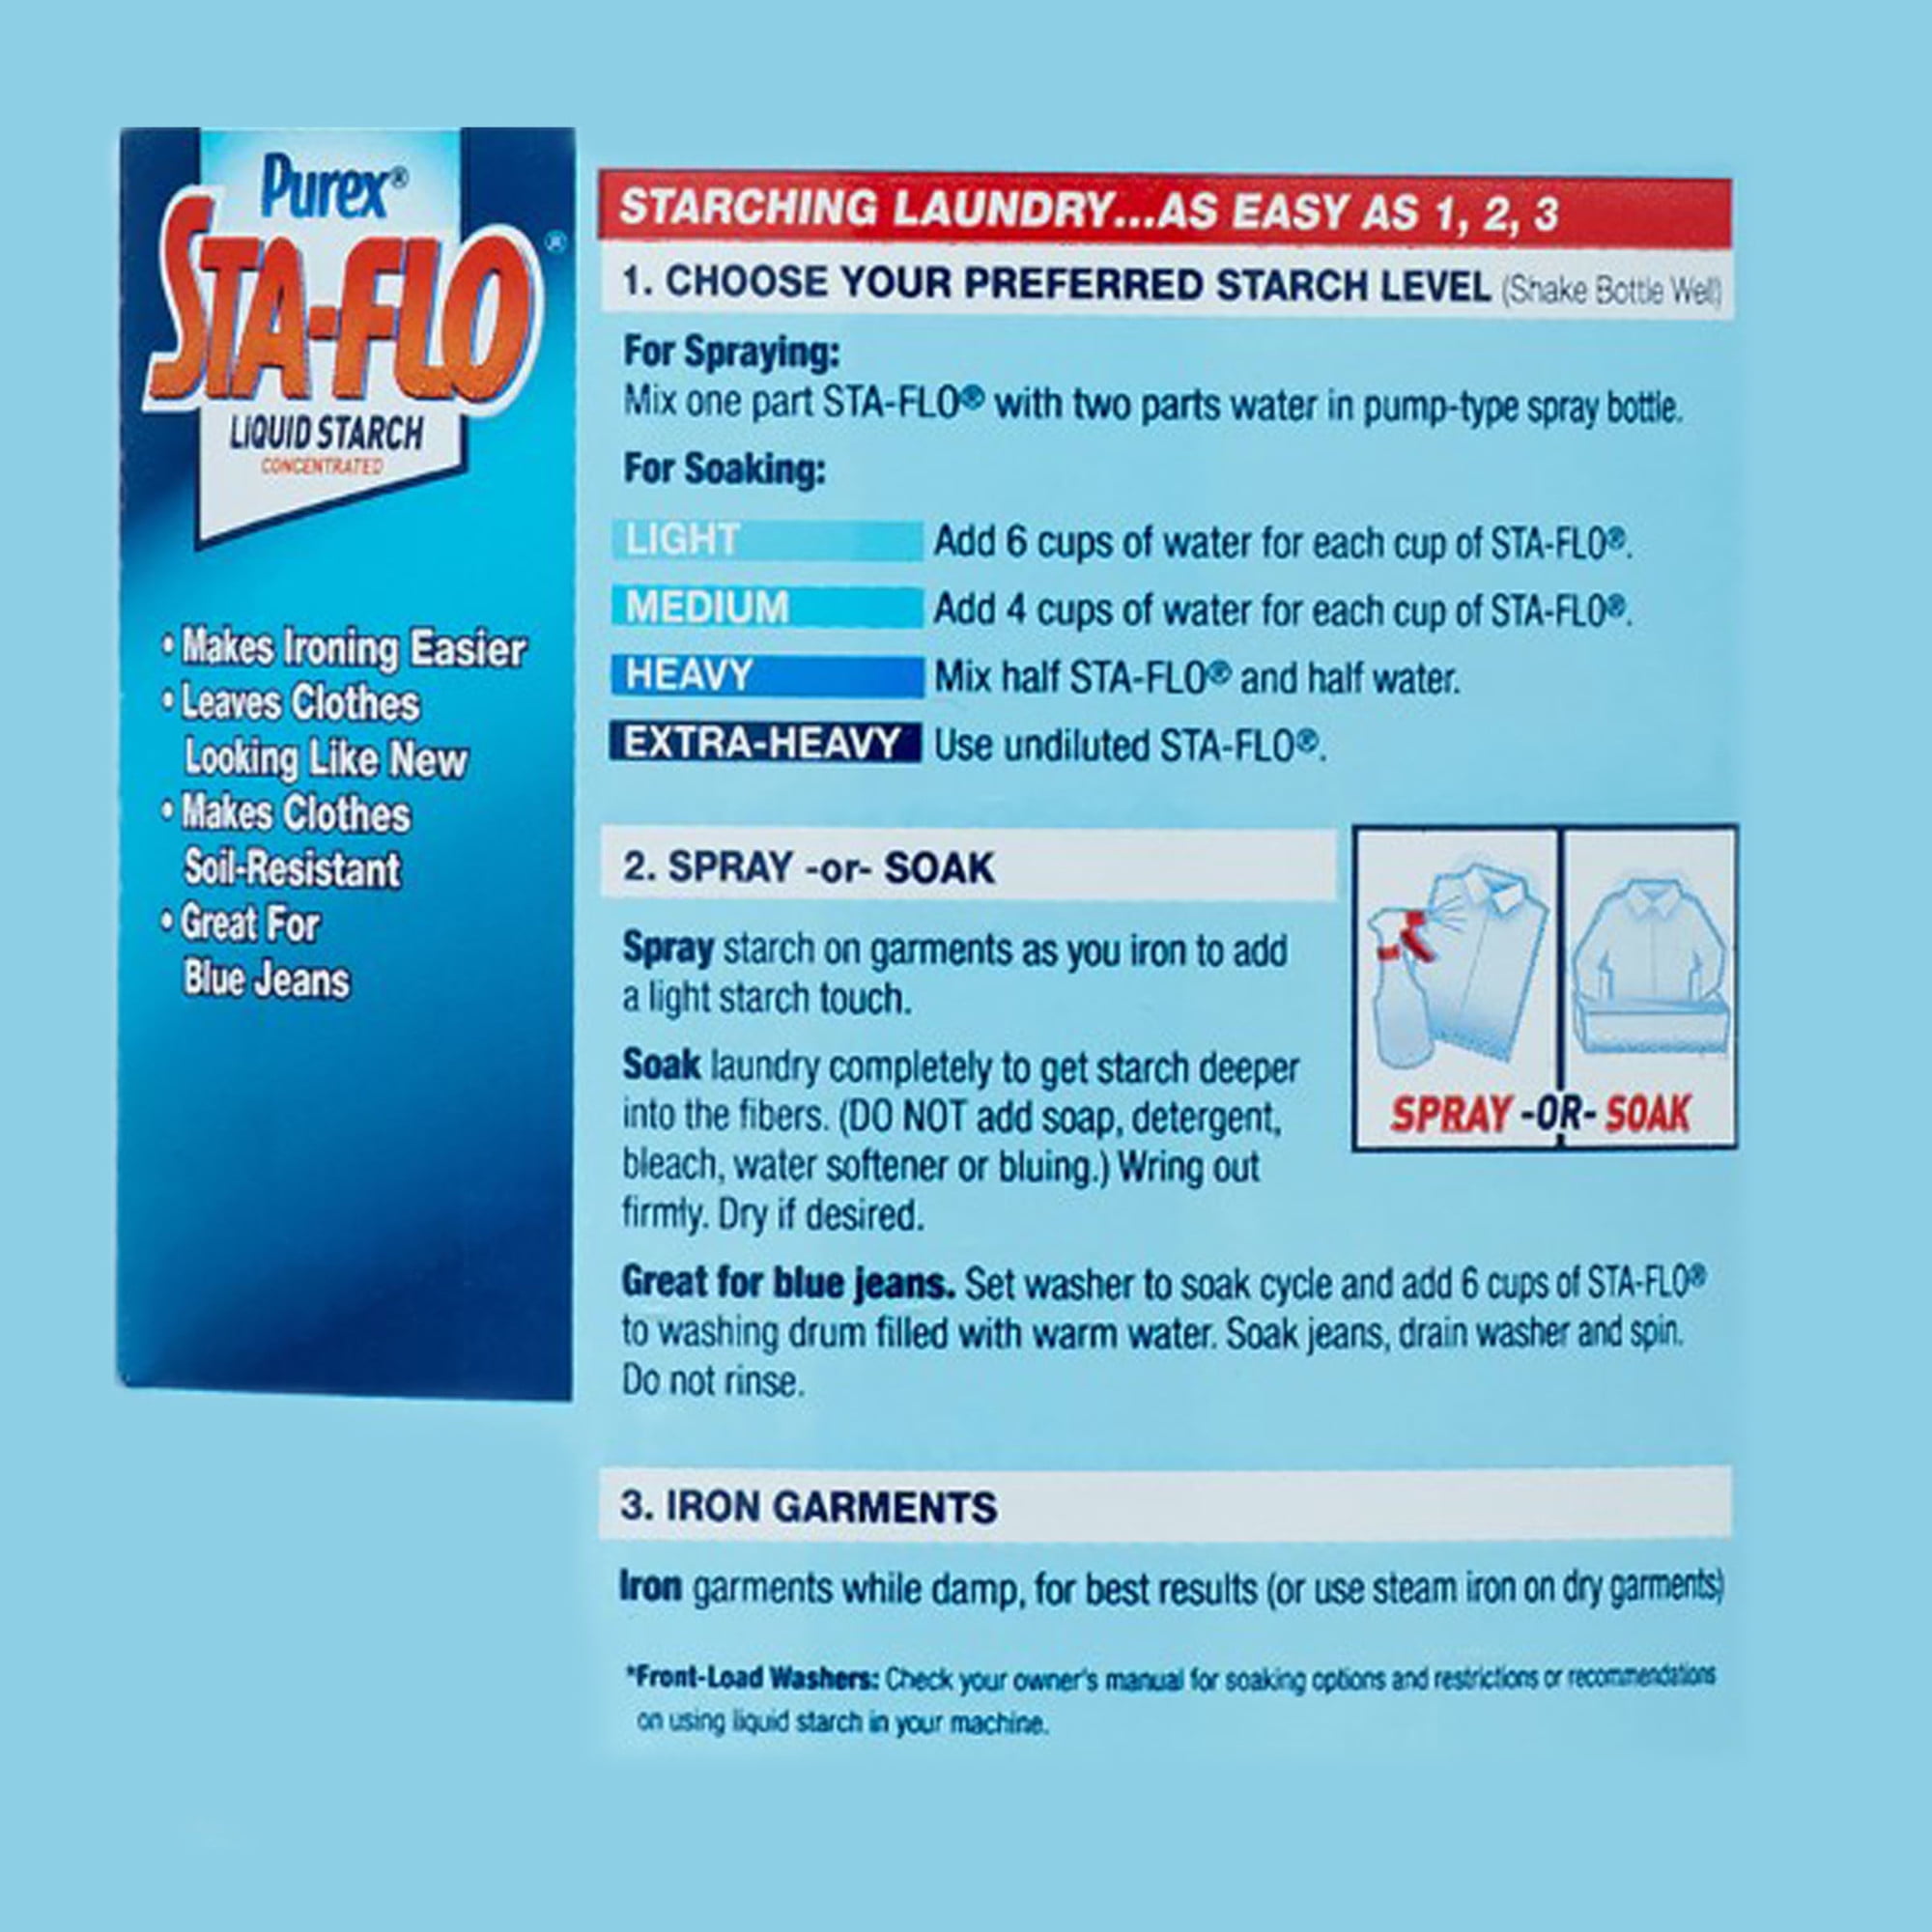 Purex Sta Flo Liquid Starch, Great for Crafts, Concentrated, 64 Ounce